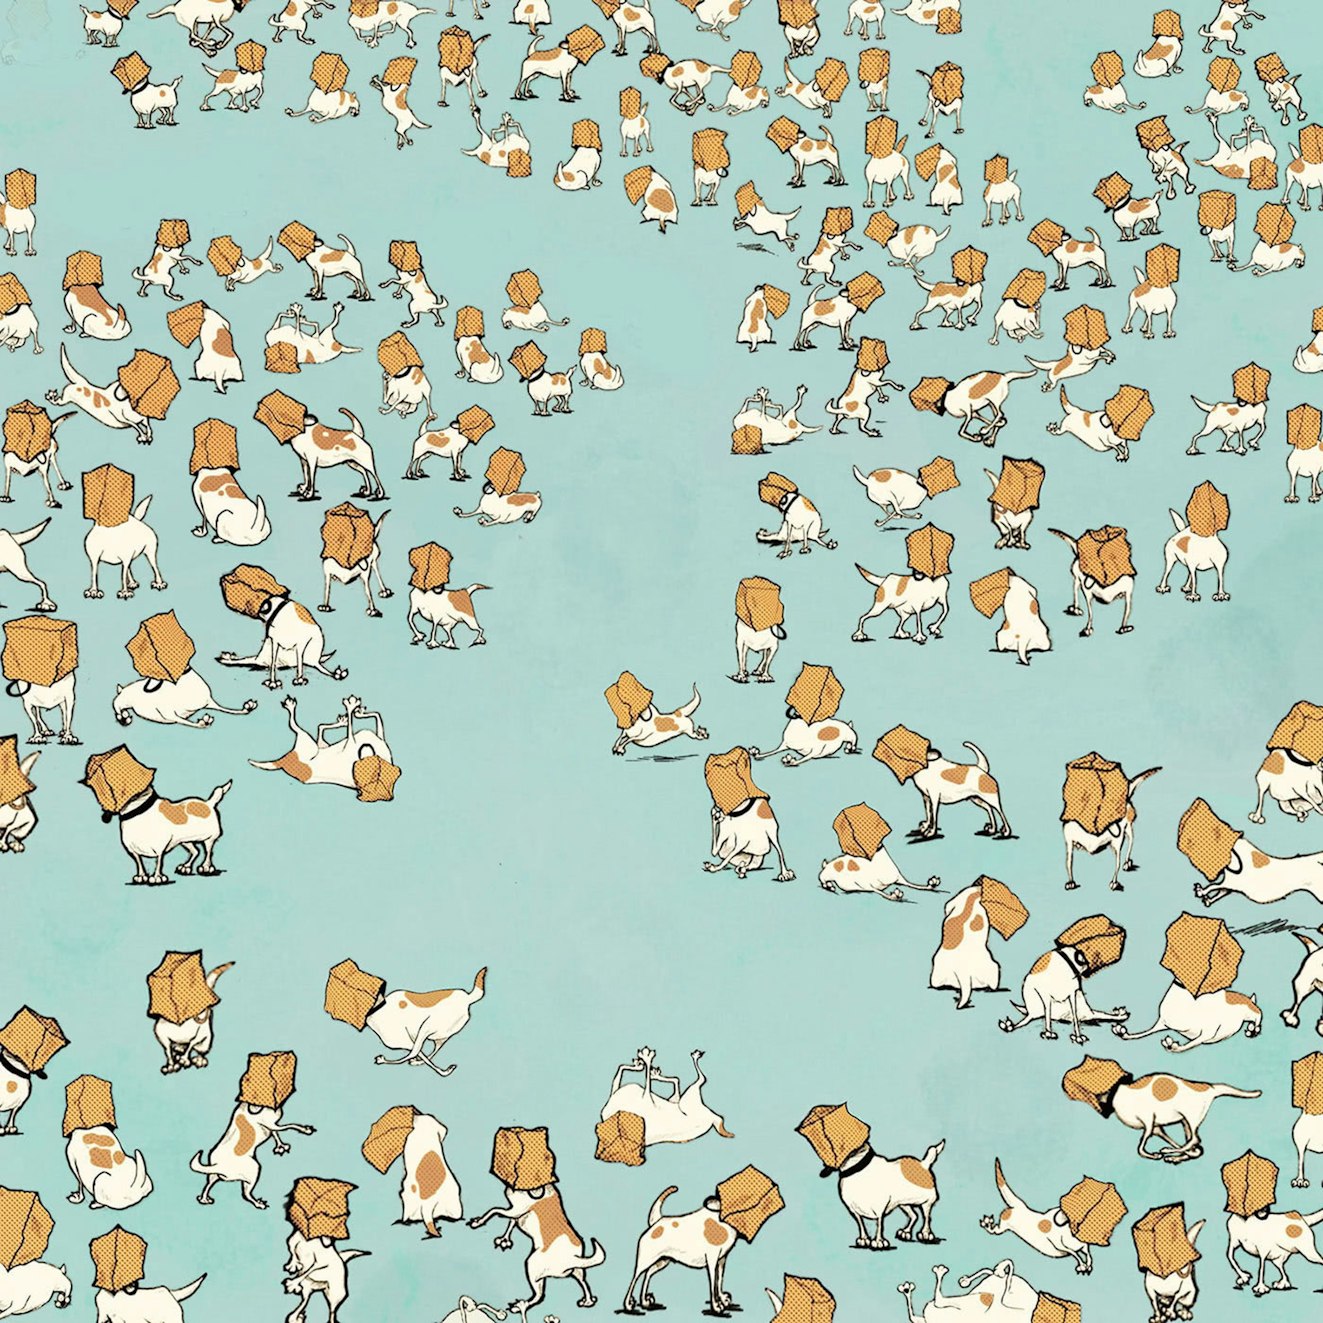 illustration representing 25,000 Jack Russell terriers with their heads stuck in paper sacks